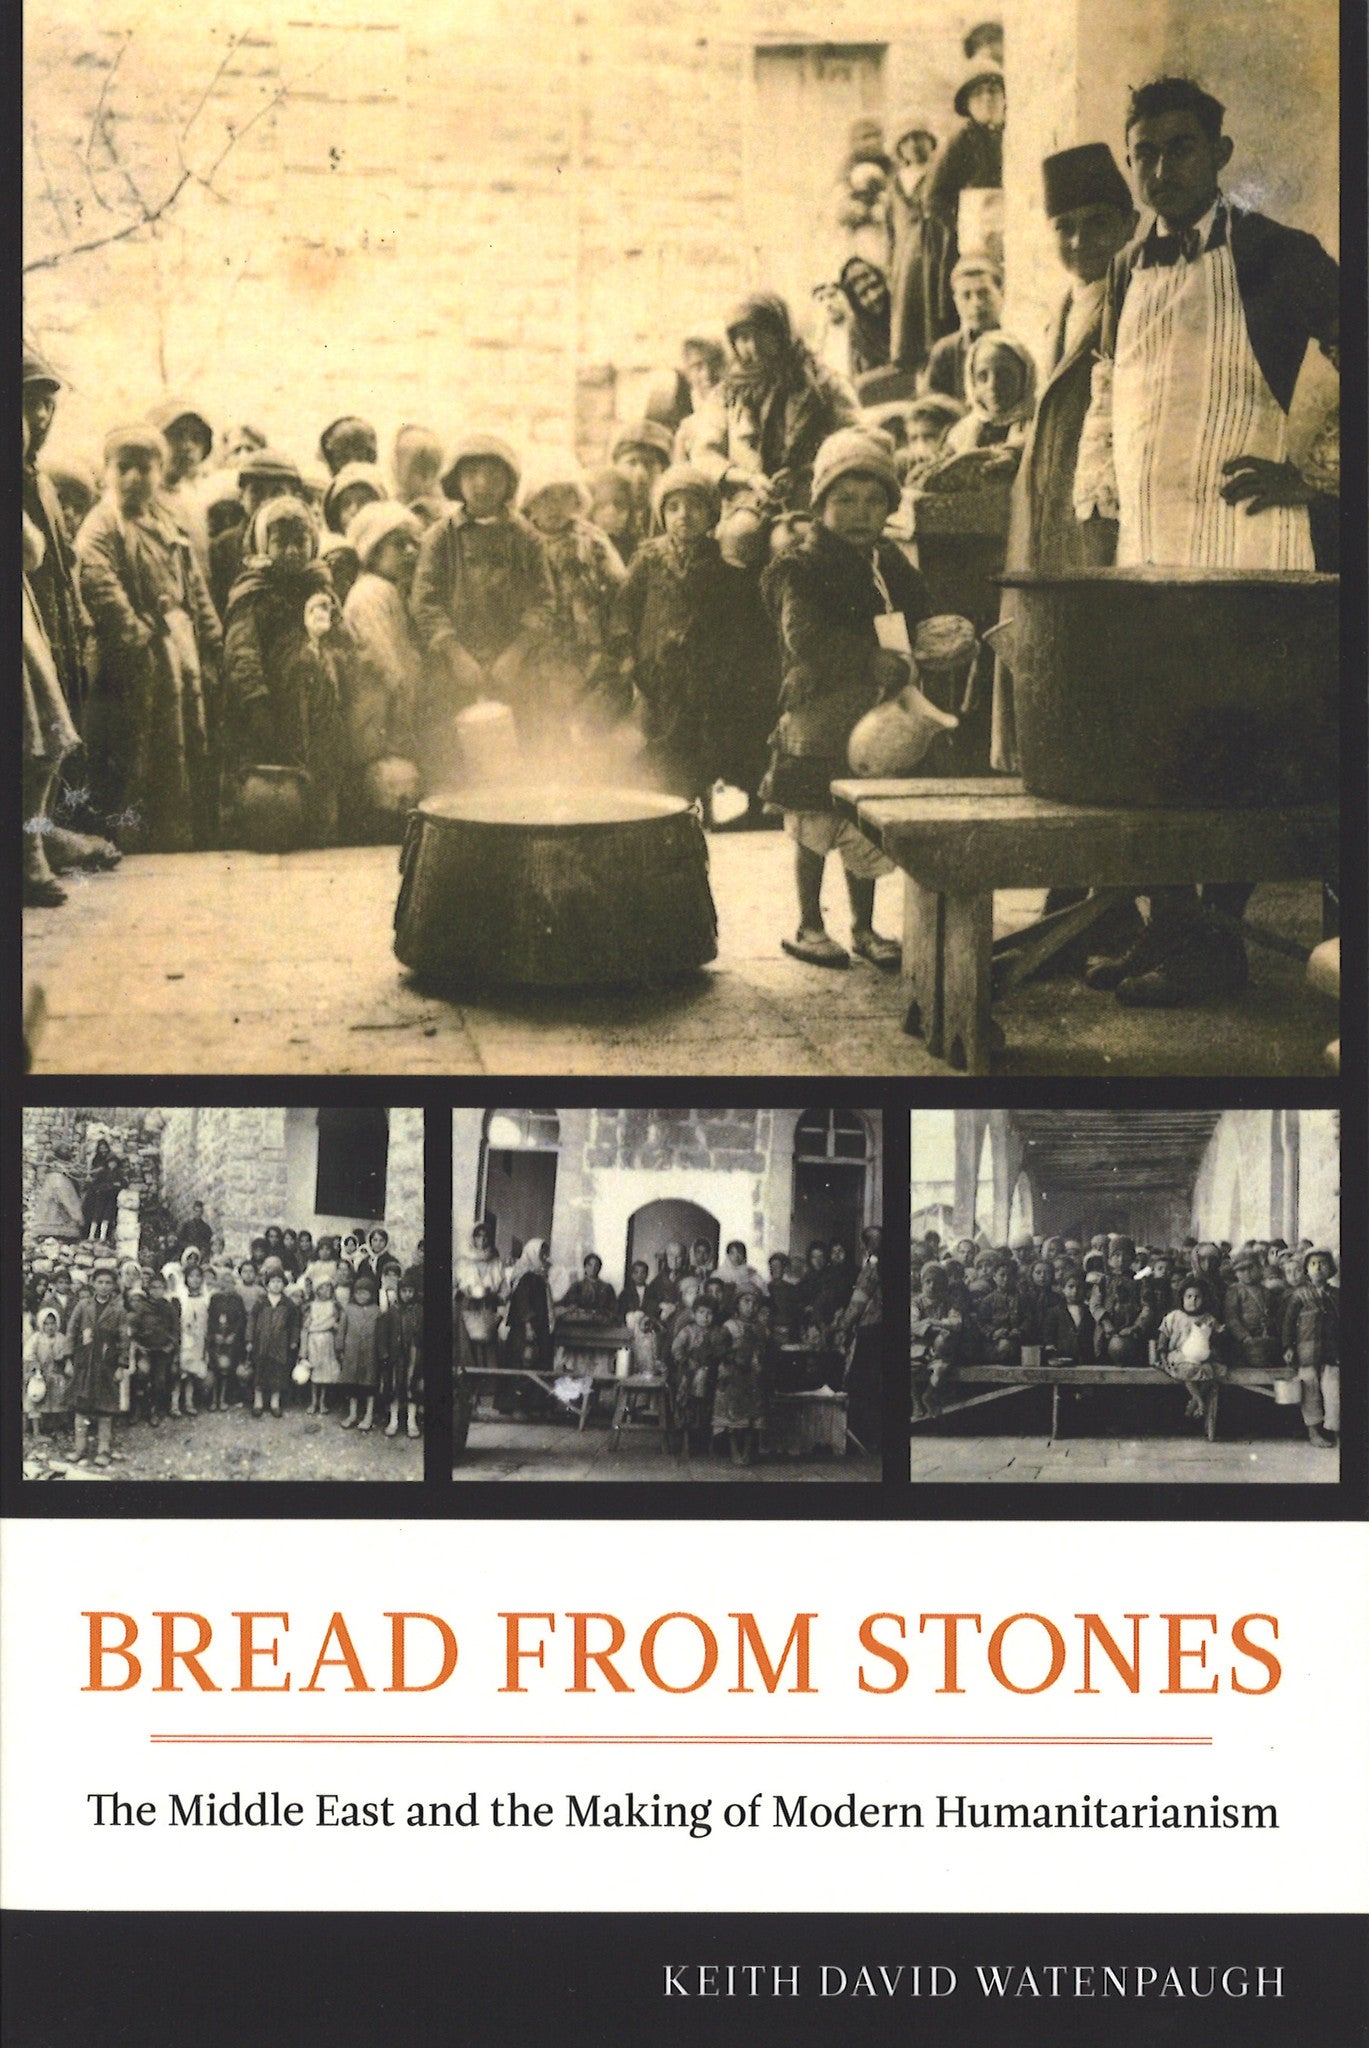 BREAD FROM STONES: The Middle East and the Making of Modern Humanitarinism